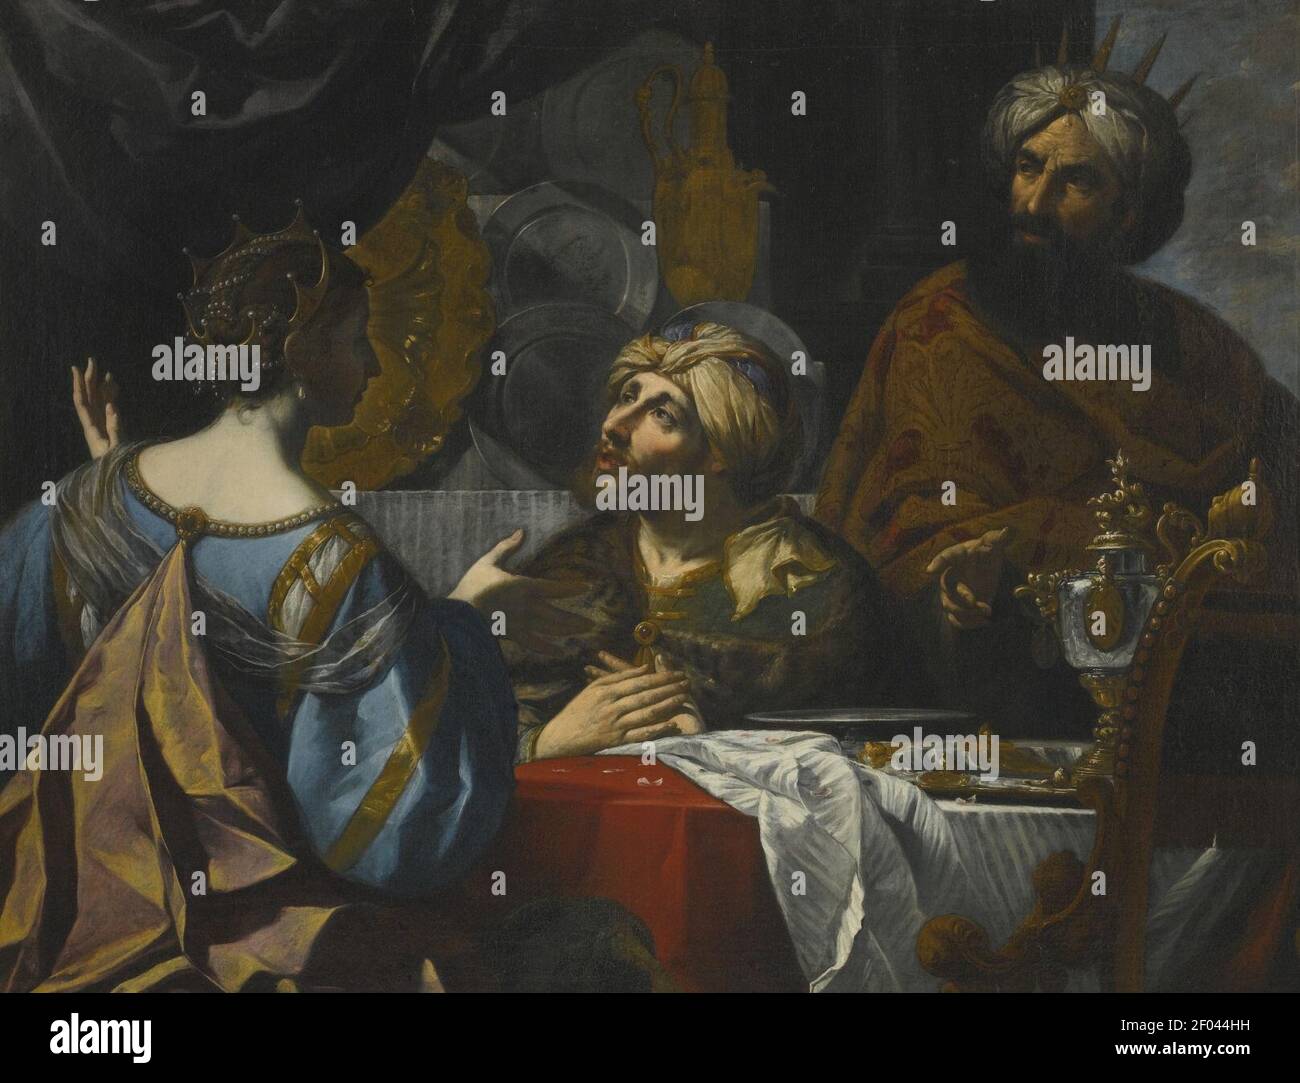 Pietro Paolini - The Intercession of Esther with King Ahasuerus and Haman. Stock Photo